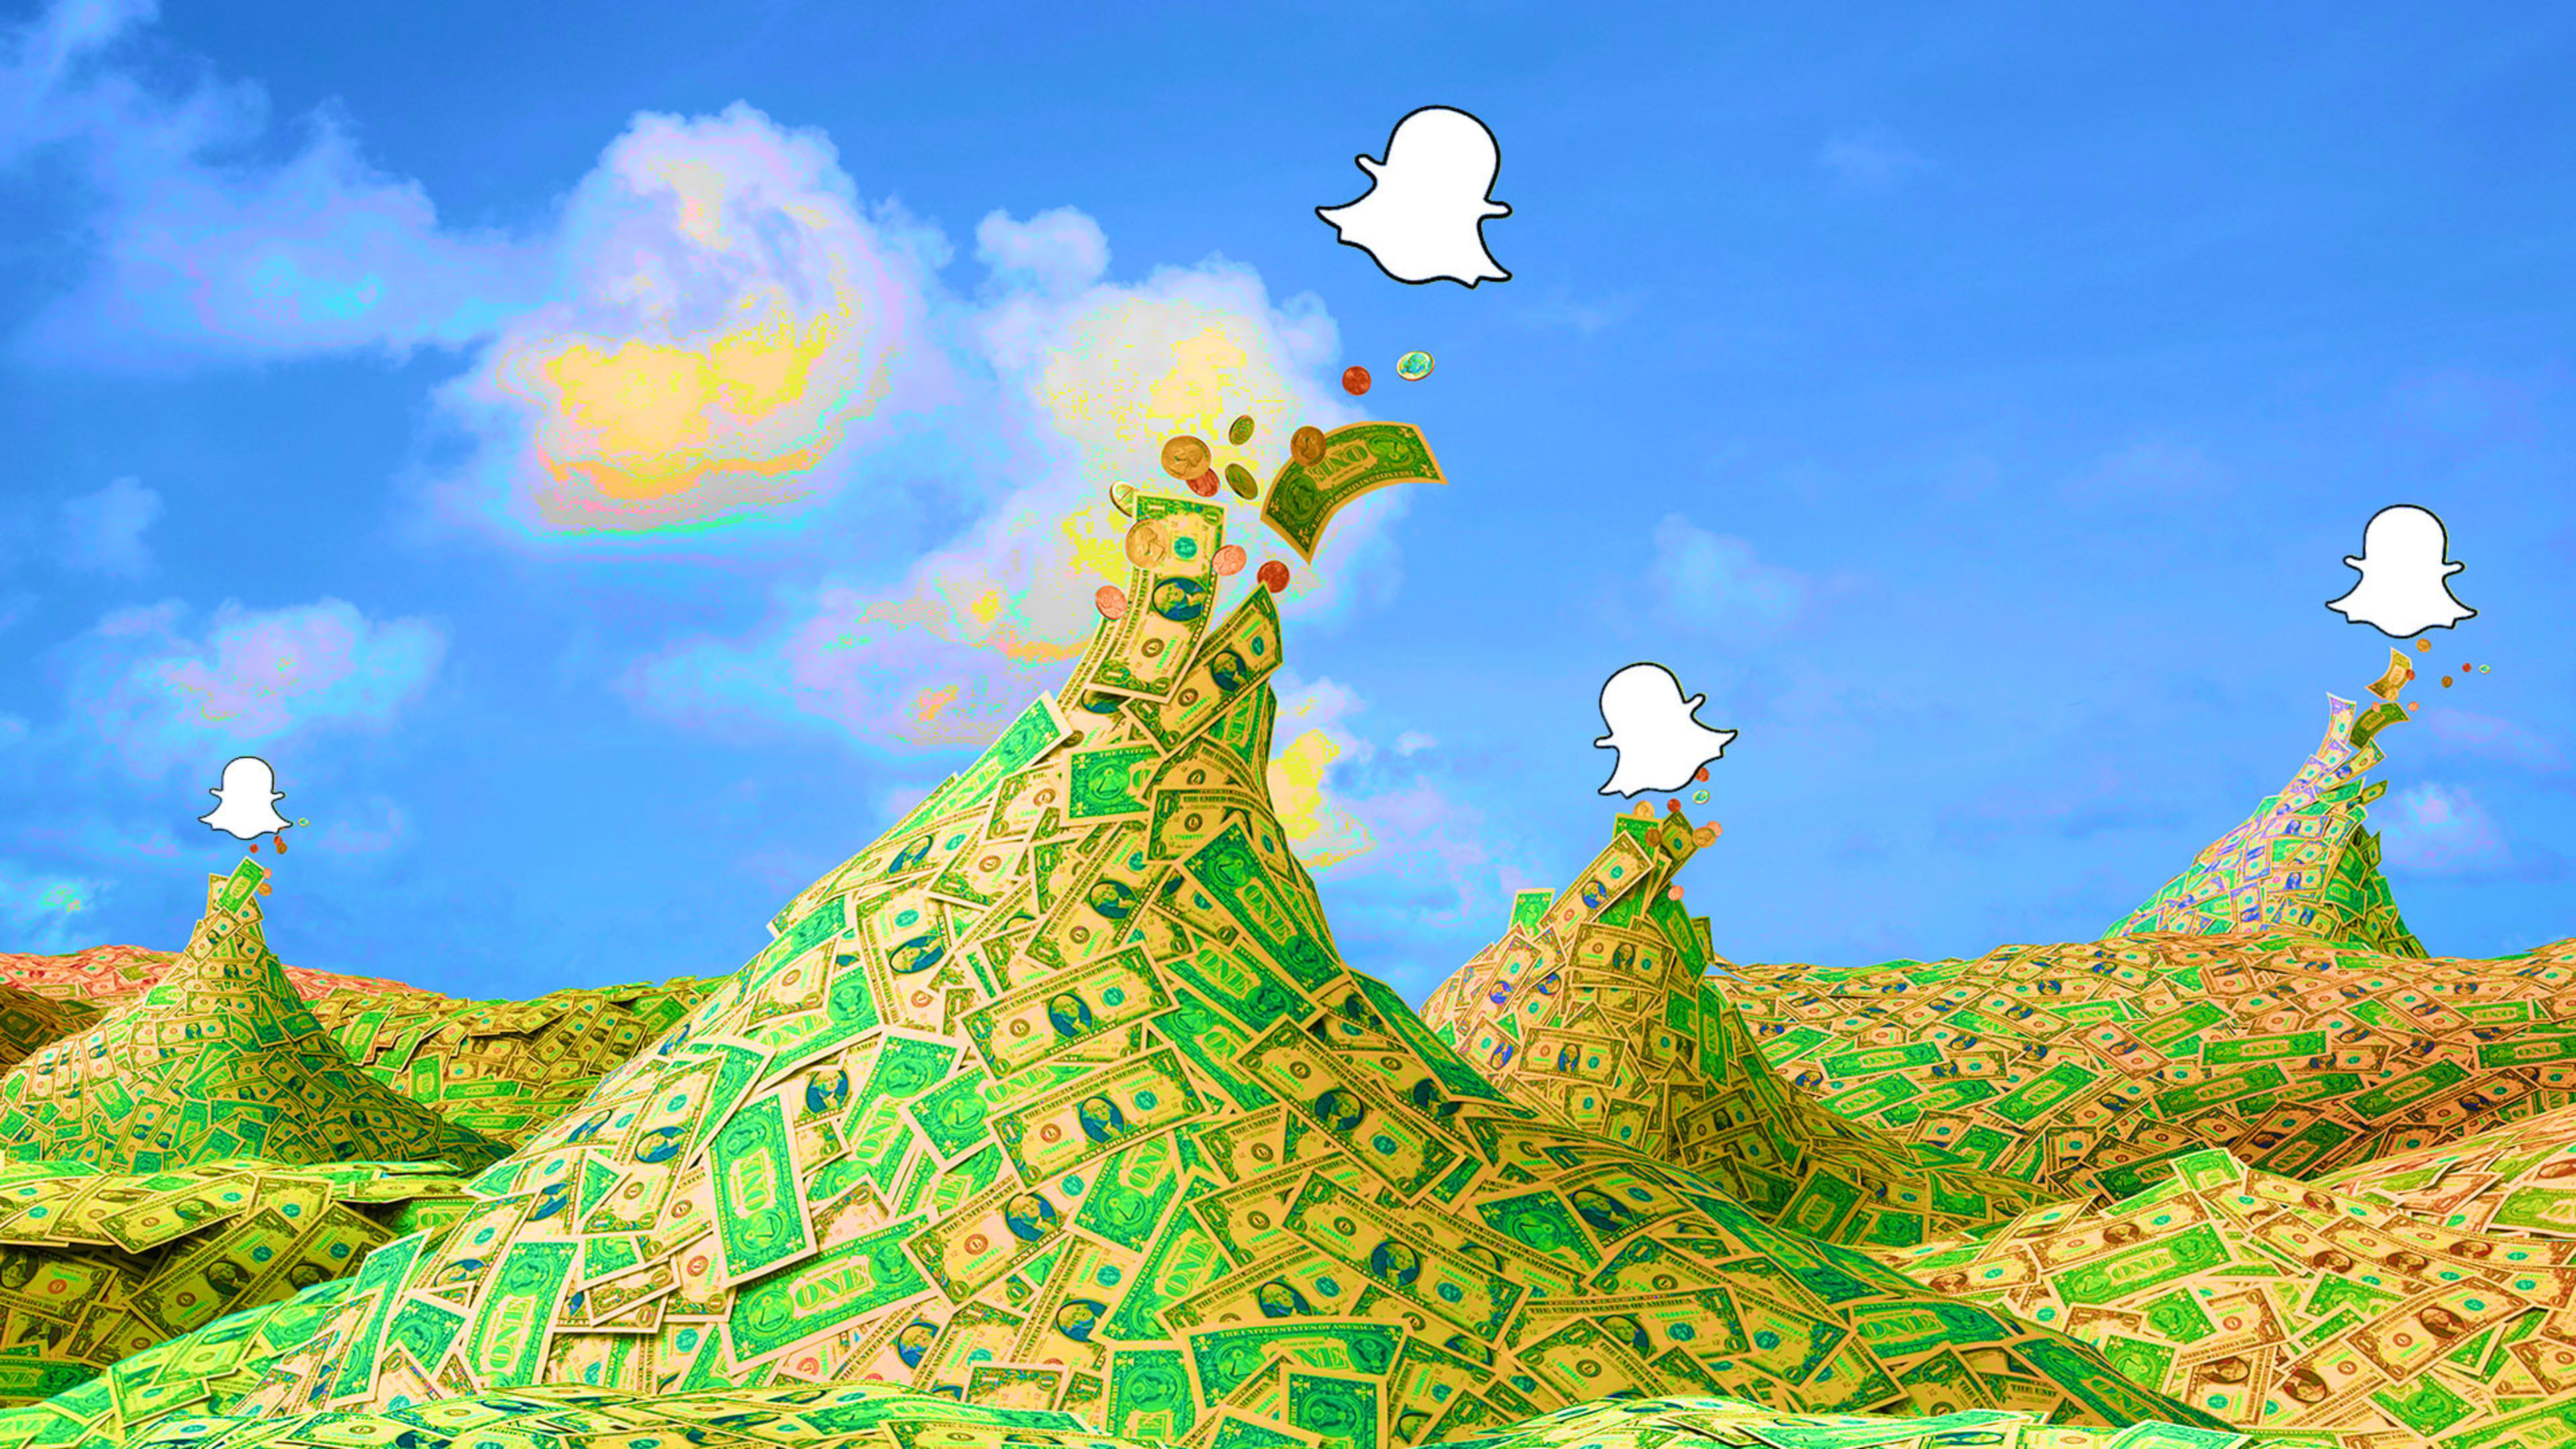 Unlike Facebook, Snap stock is surging. Here’s what’s happening